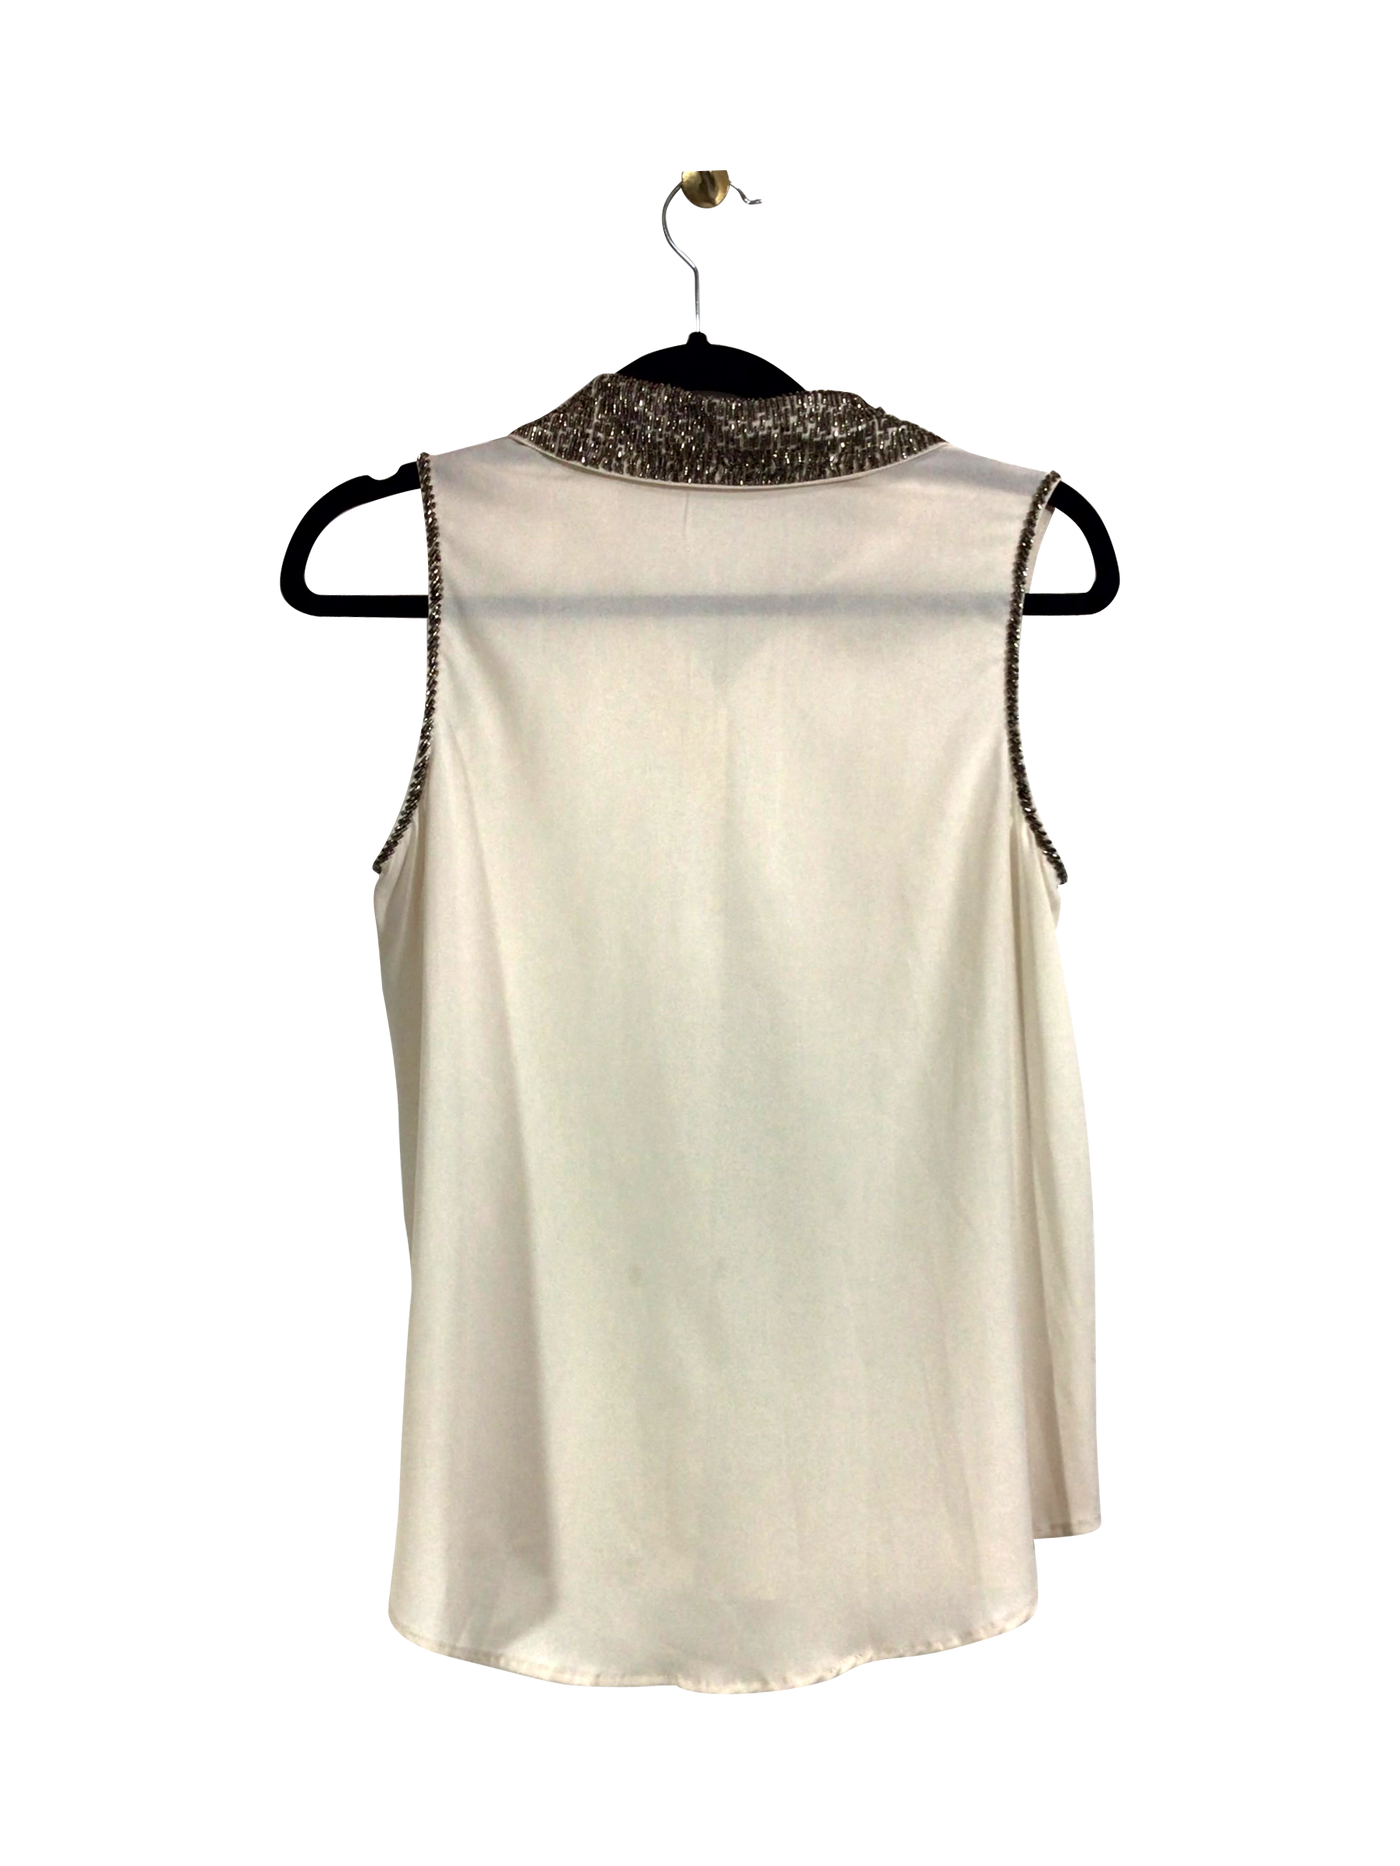 ENGLISH ROSE Button-down Top Regular fit in White - Size S | 15 $ KOOP